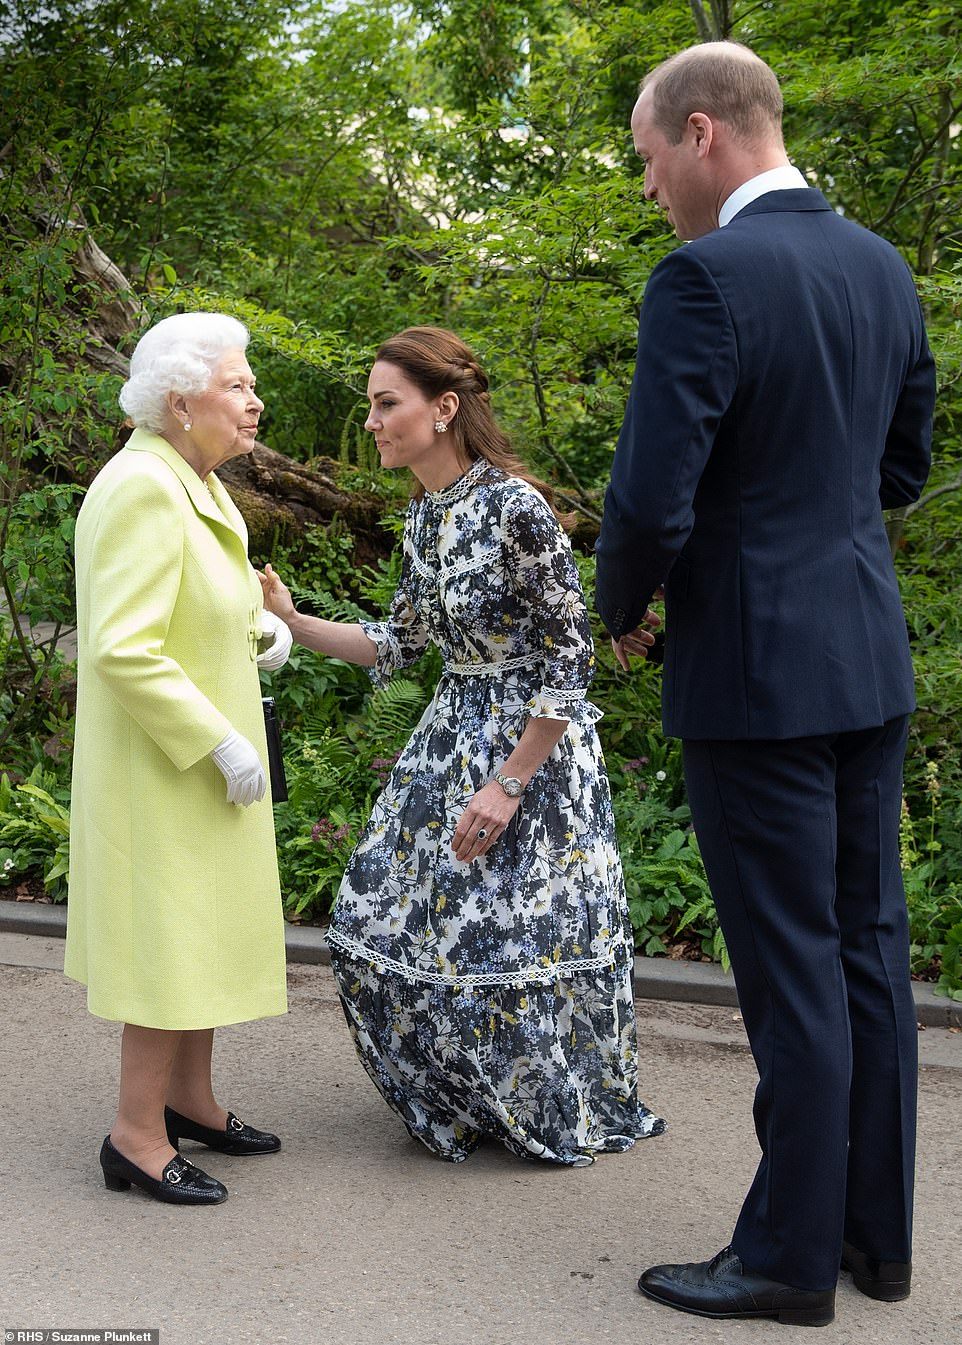 Queen Elizabeth clearly loves Kate Middleton